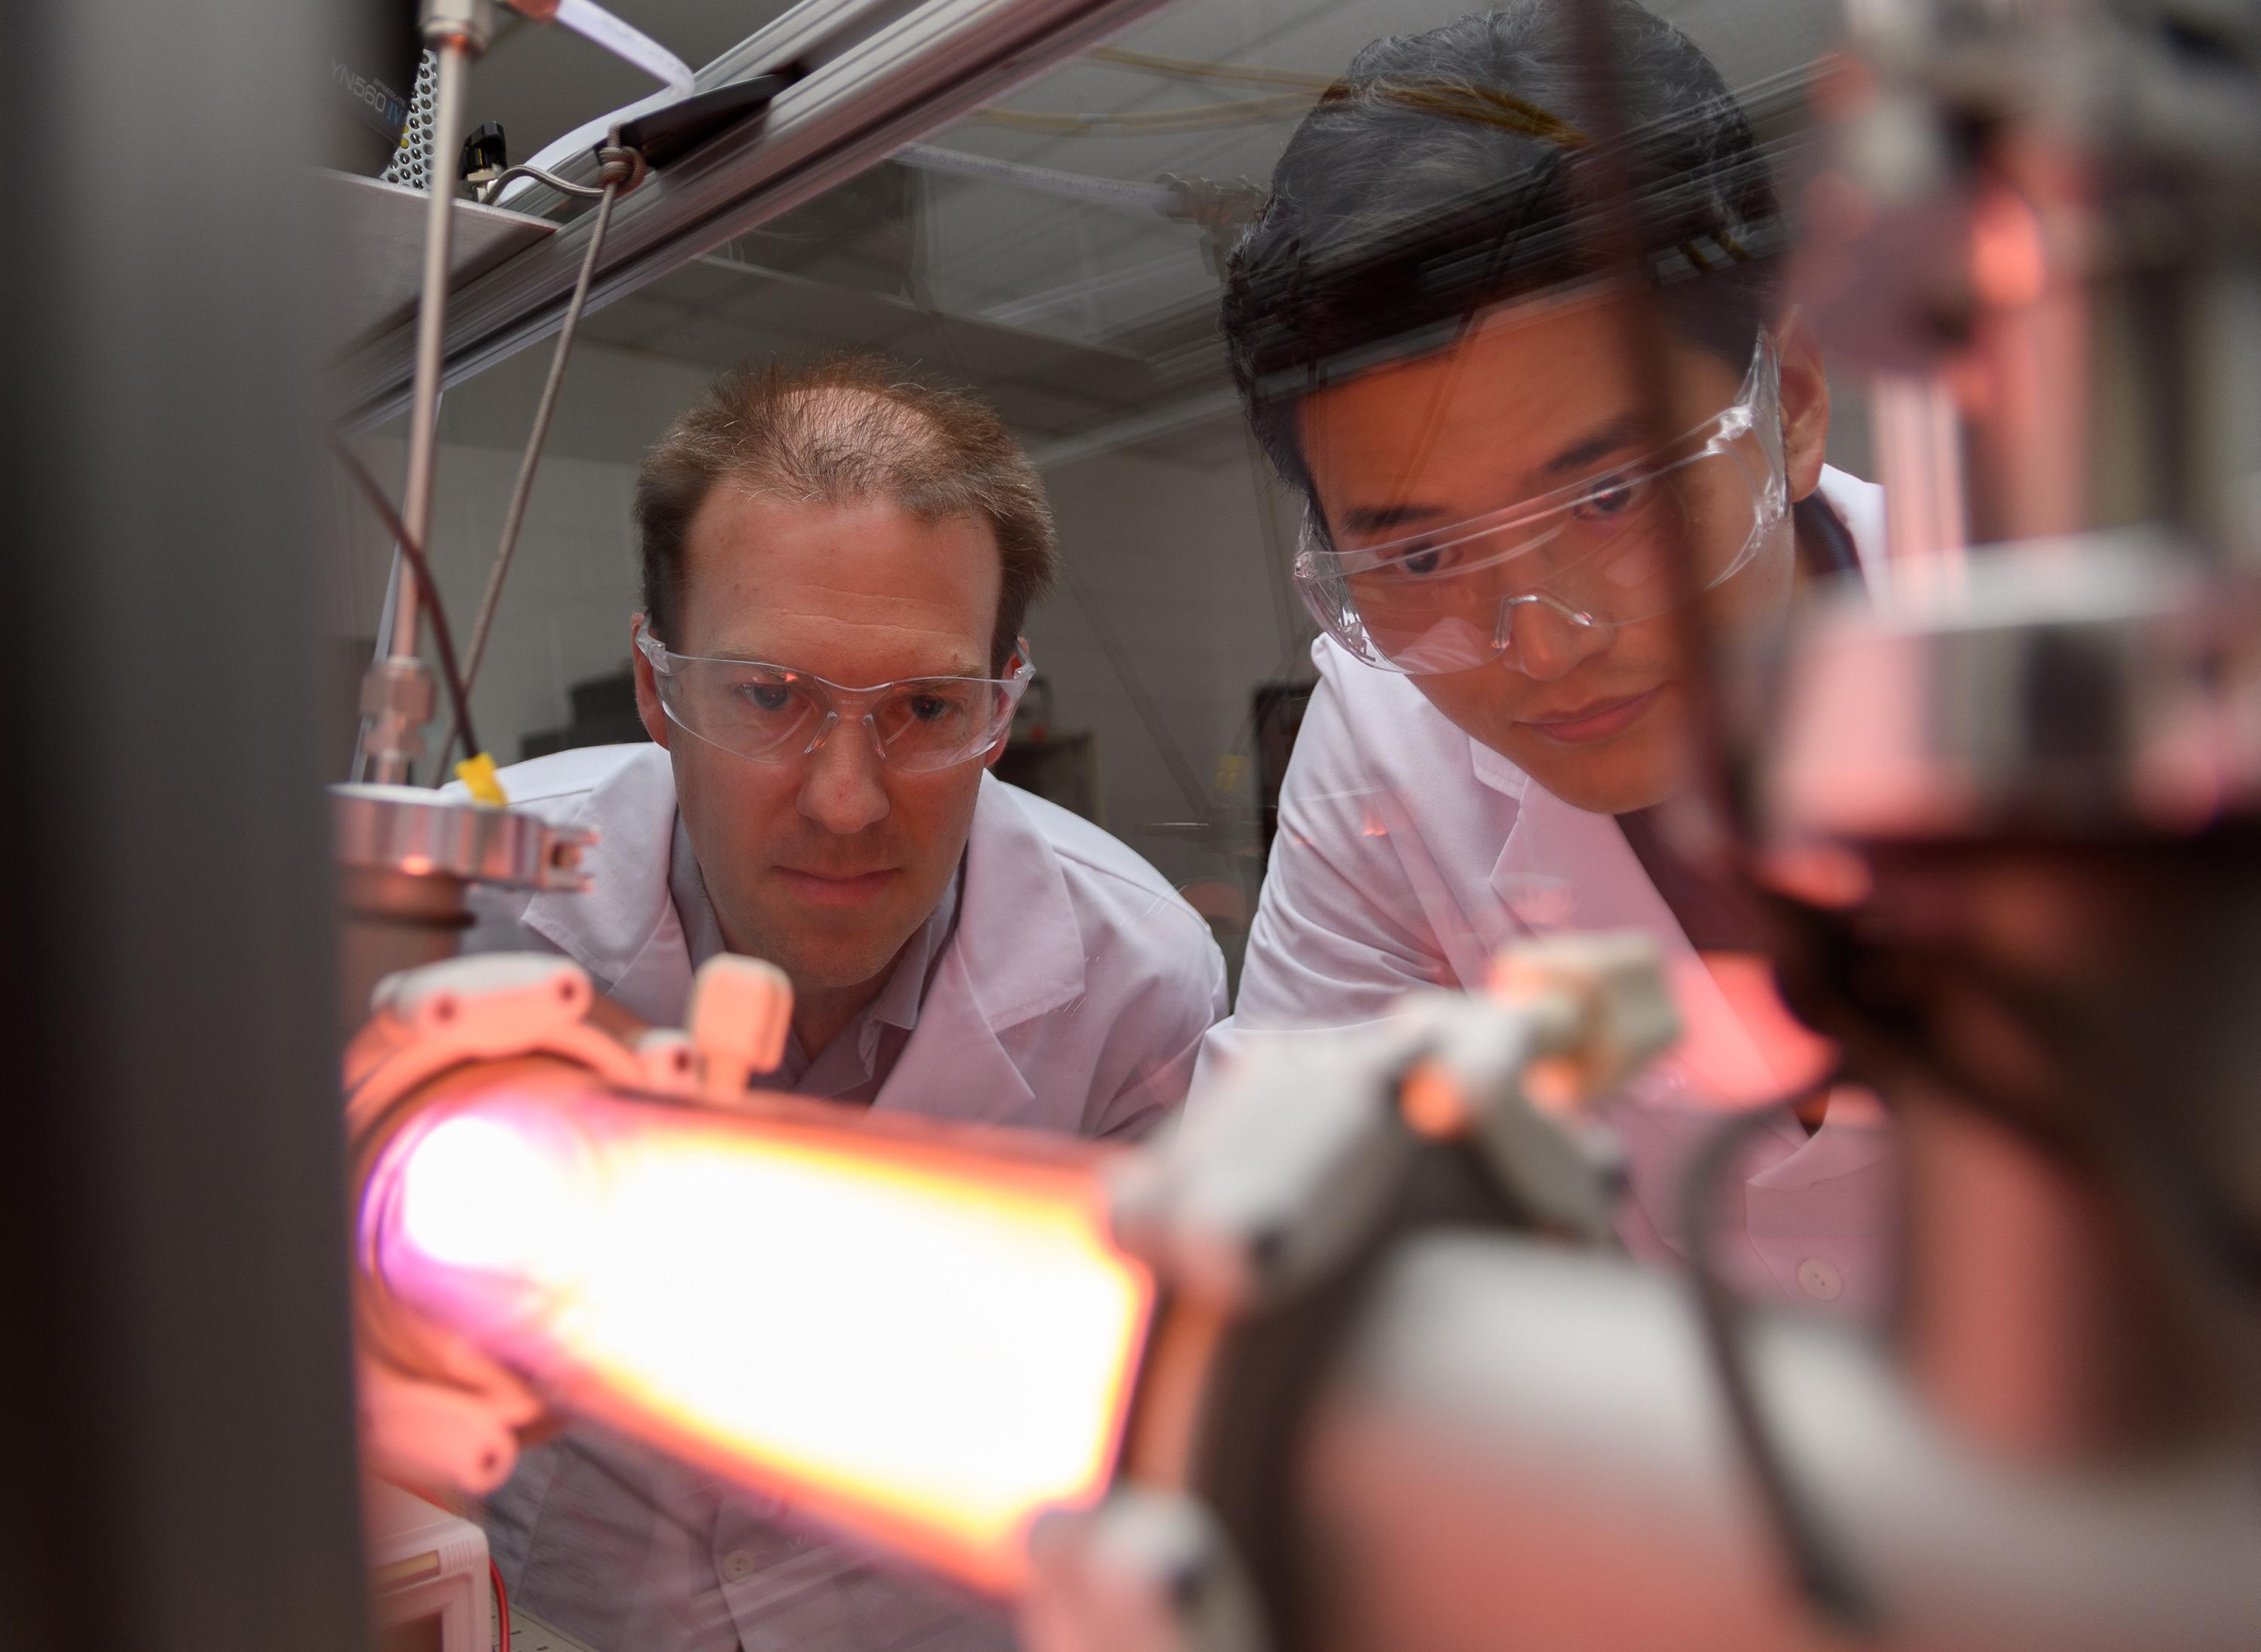 Georgia Tech Professor Lukas Graber and Postdoctoral Fellow Chanyeop Park study the plasma potential surrounding materials being evaluated for use in improved DC circuit breakers. The low-energy argon plasma creates the purple color. (Photo: Rob Felt, Georgia Tech)